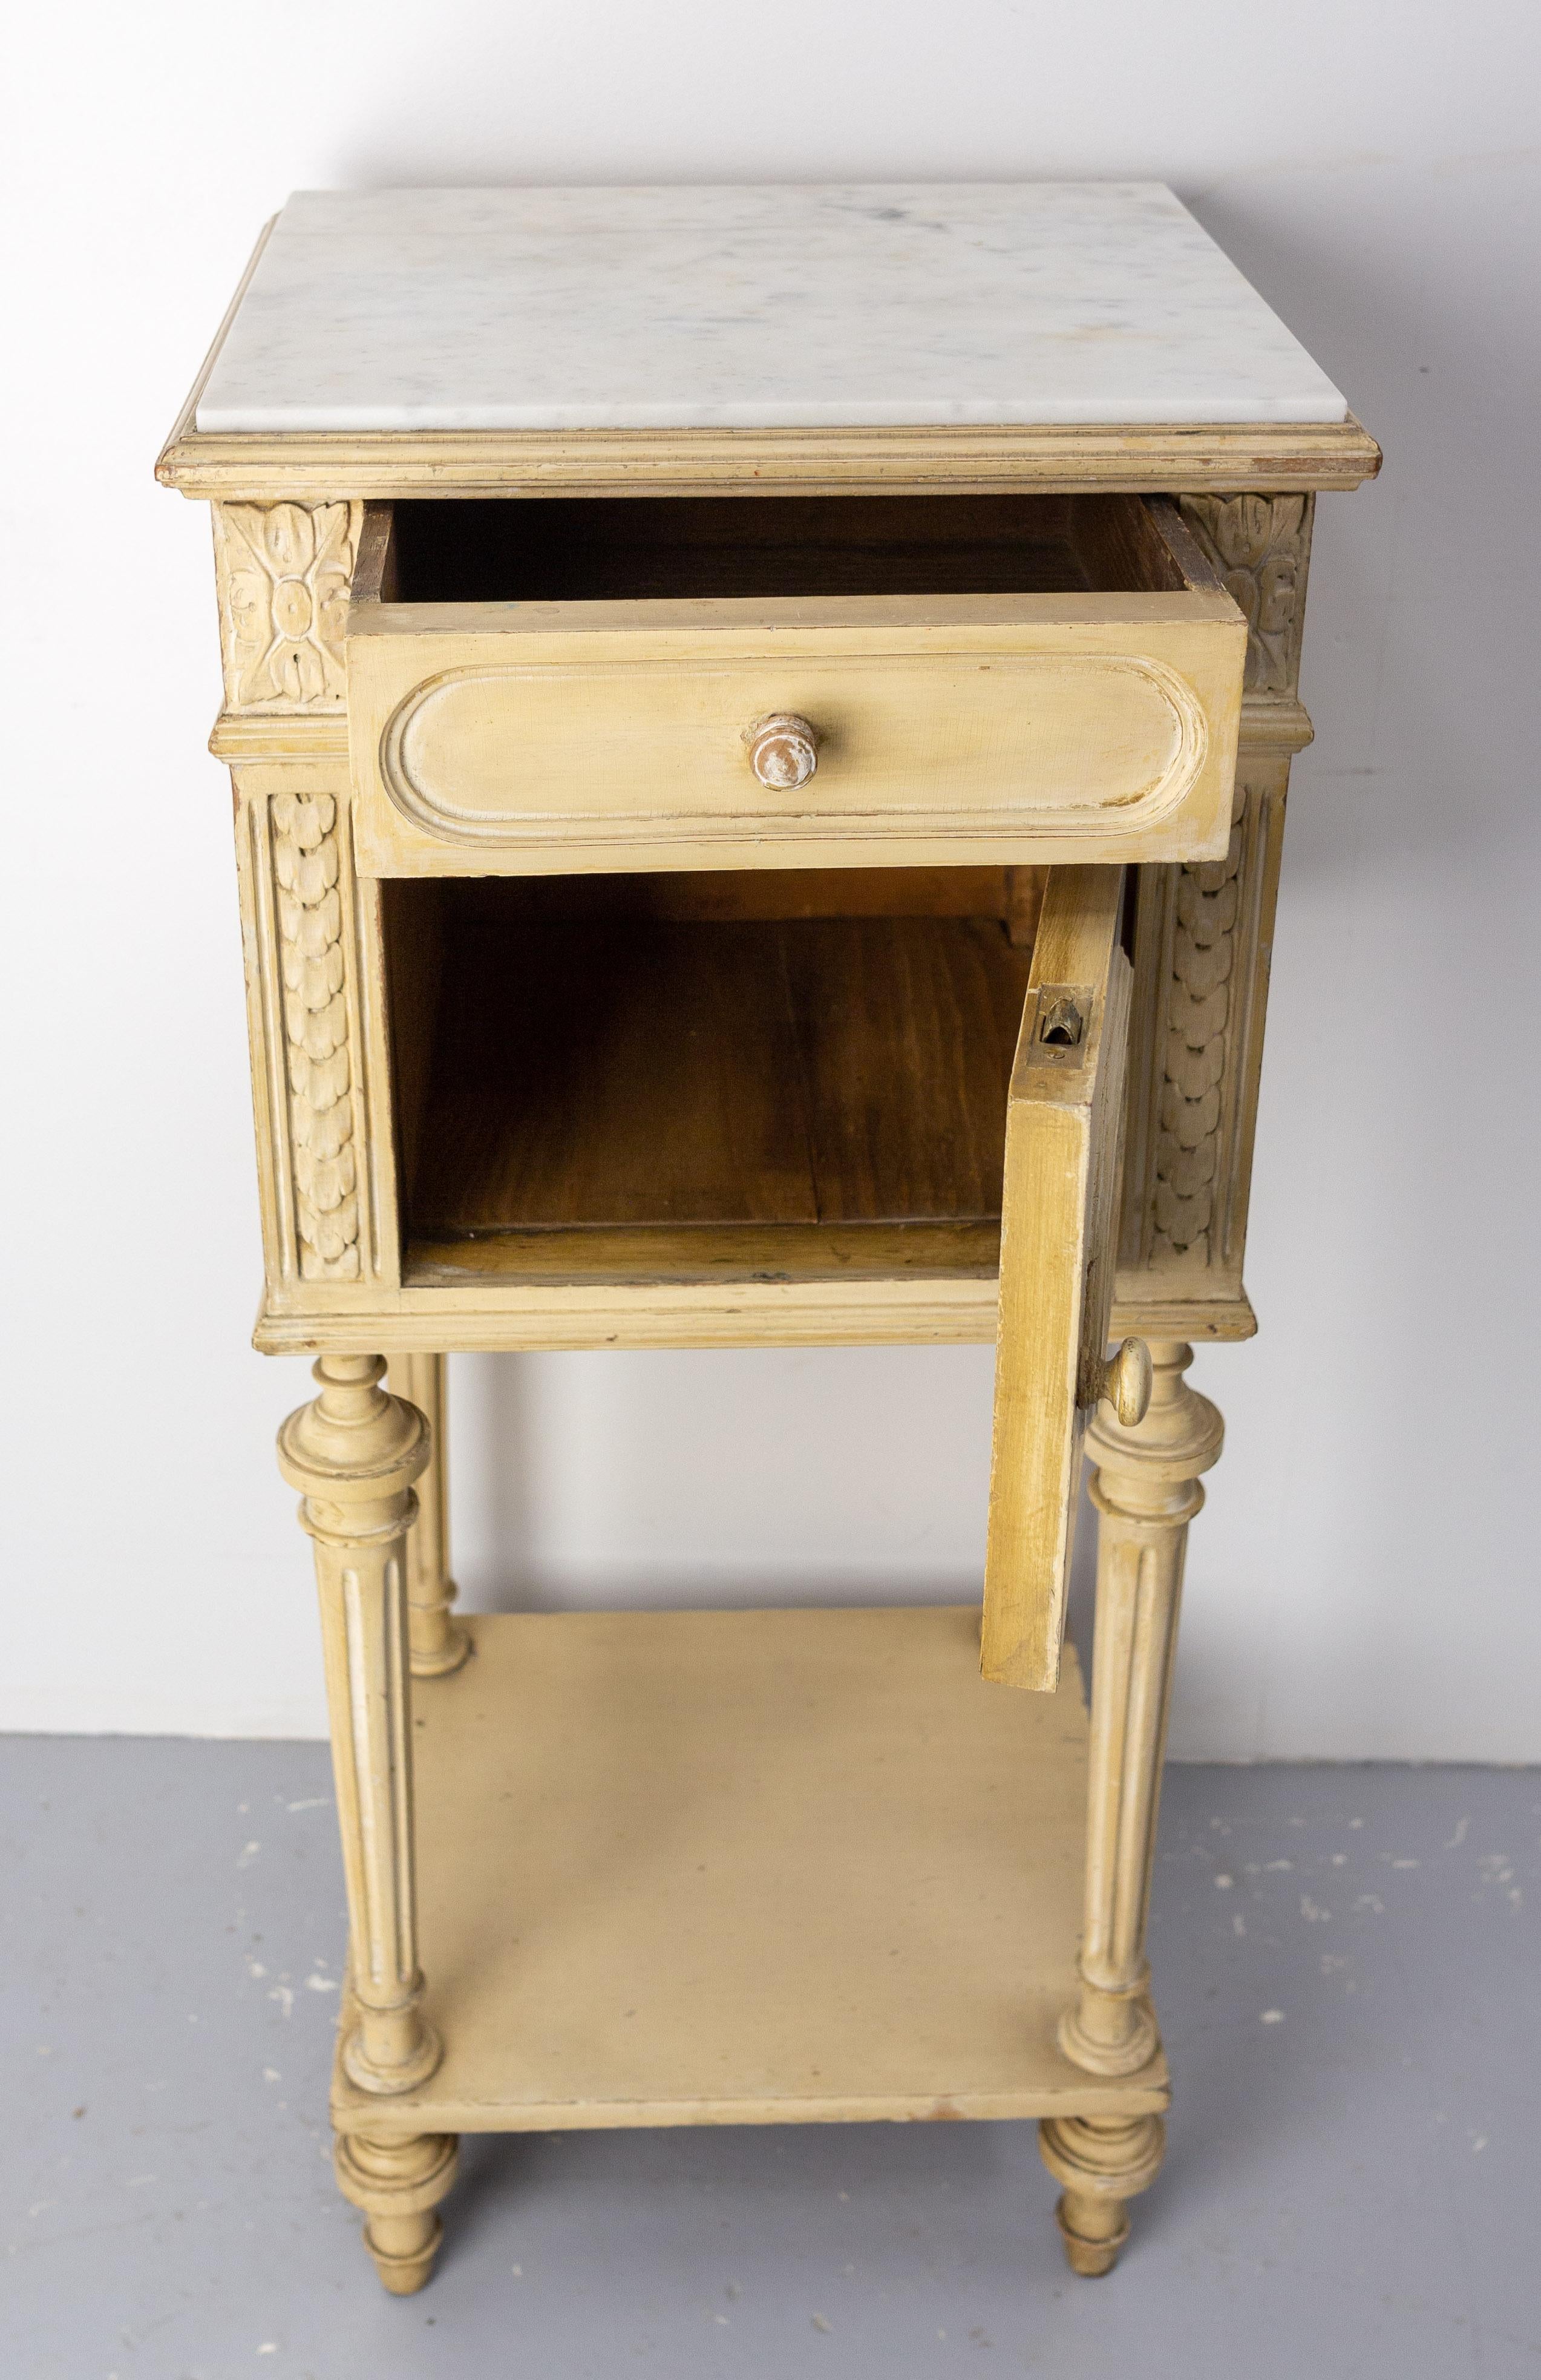 French Bedside Table Patinated Wood, Marble Top & Cane Door Louis XVI St, c 1900 For Sale 3